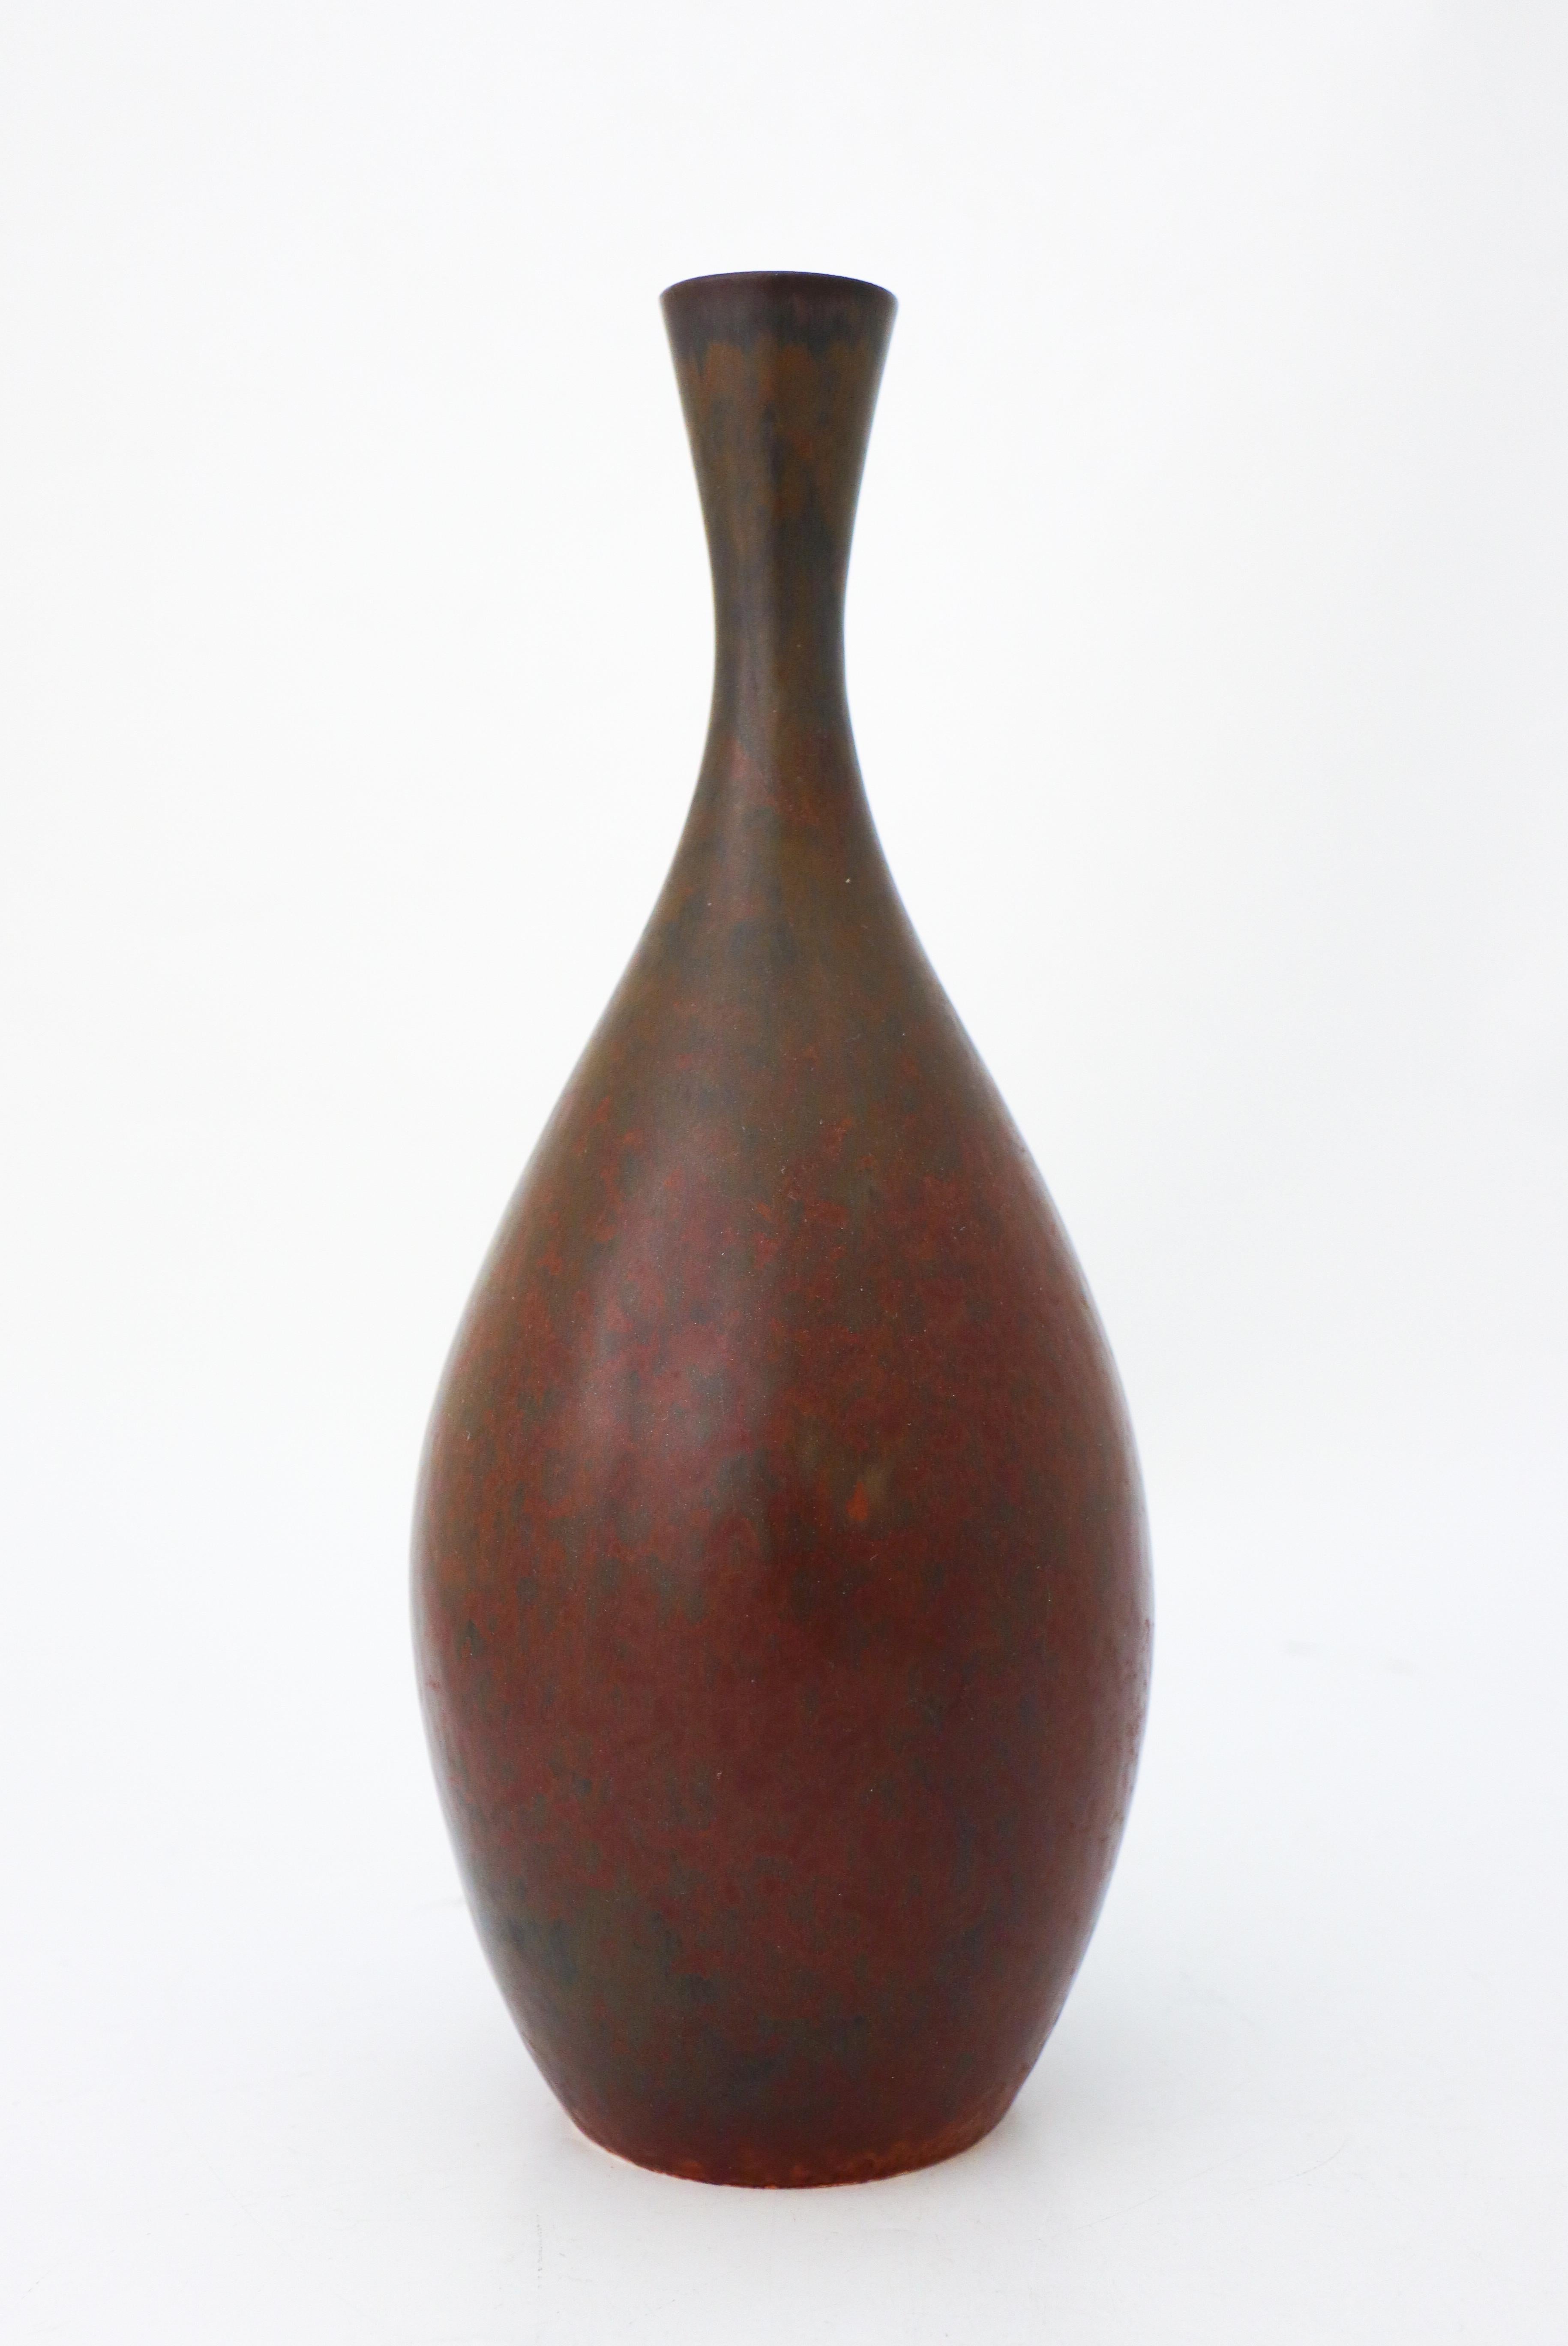 A vase with a lovely brown glaze designed by Carl-Harry Stålhane at Rörstrand. The vase is 28,5 cm (11.4